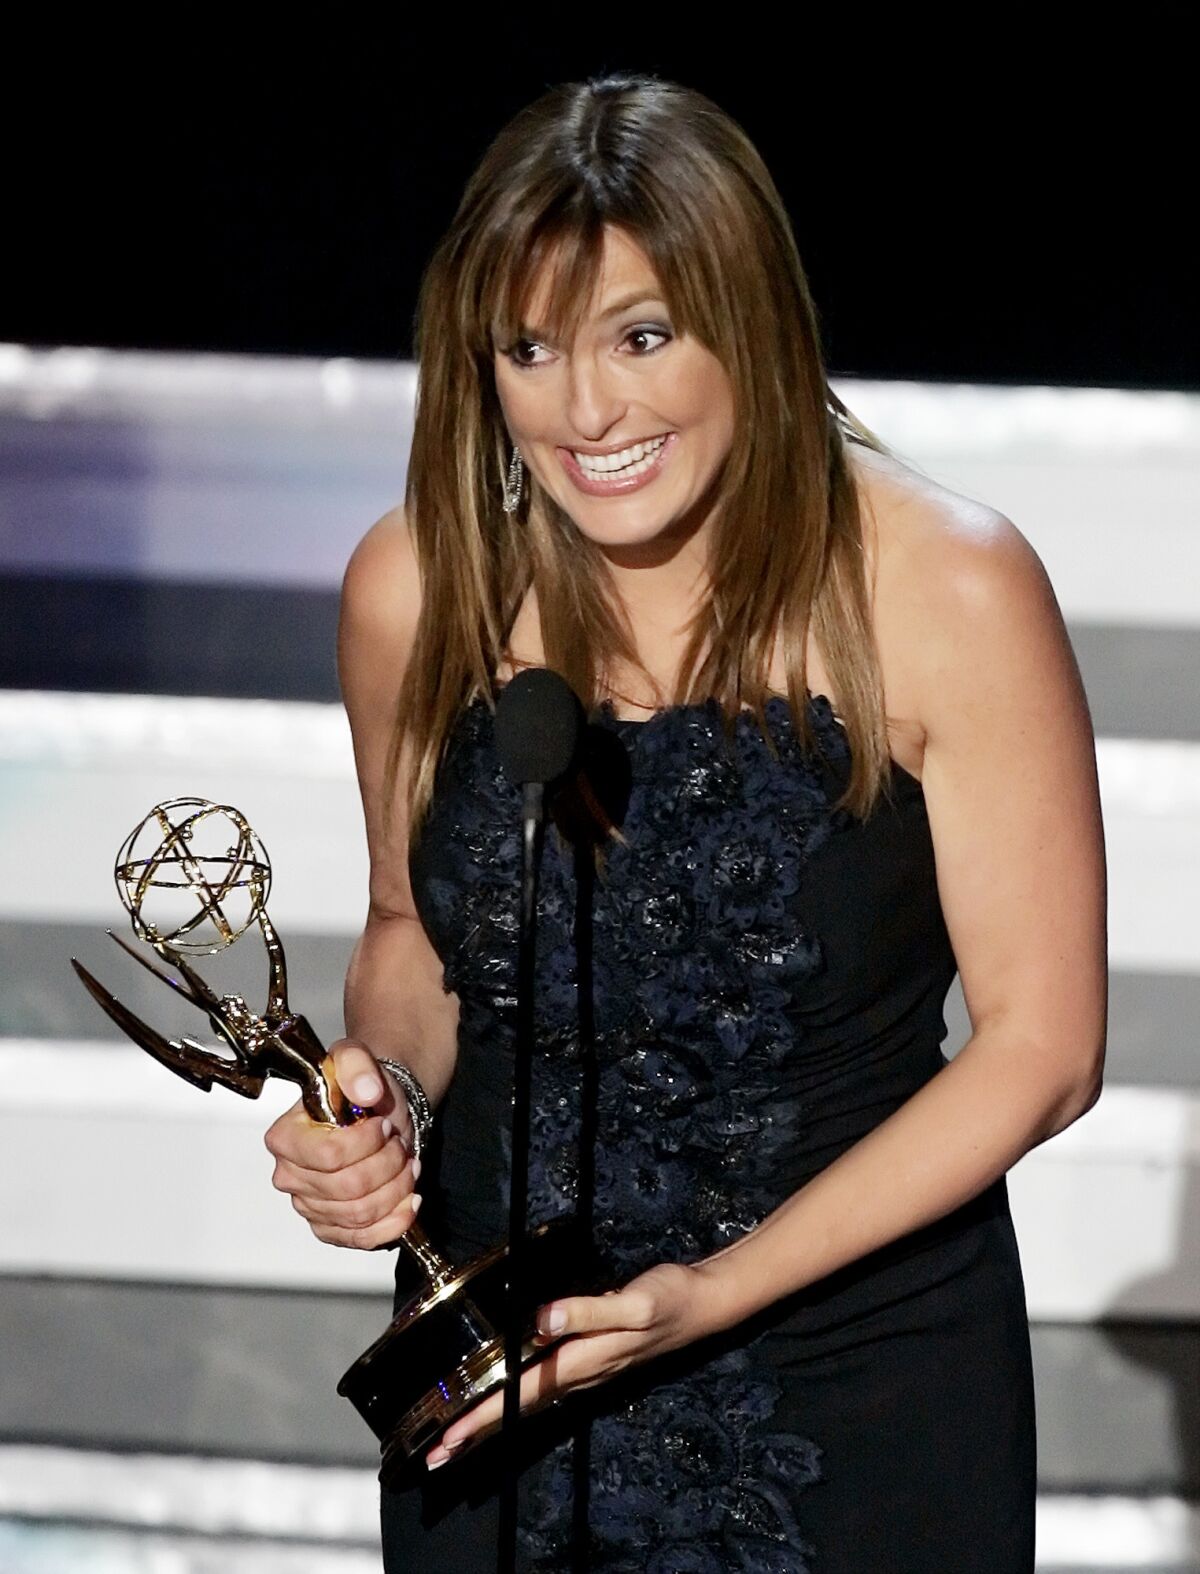 Mariska Hargitay accepts the award for lead actress in a drama series for her work on "Law & Order: Special Victims Unit" at the 58th Primetime Emmy Awards in 2006.